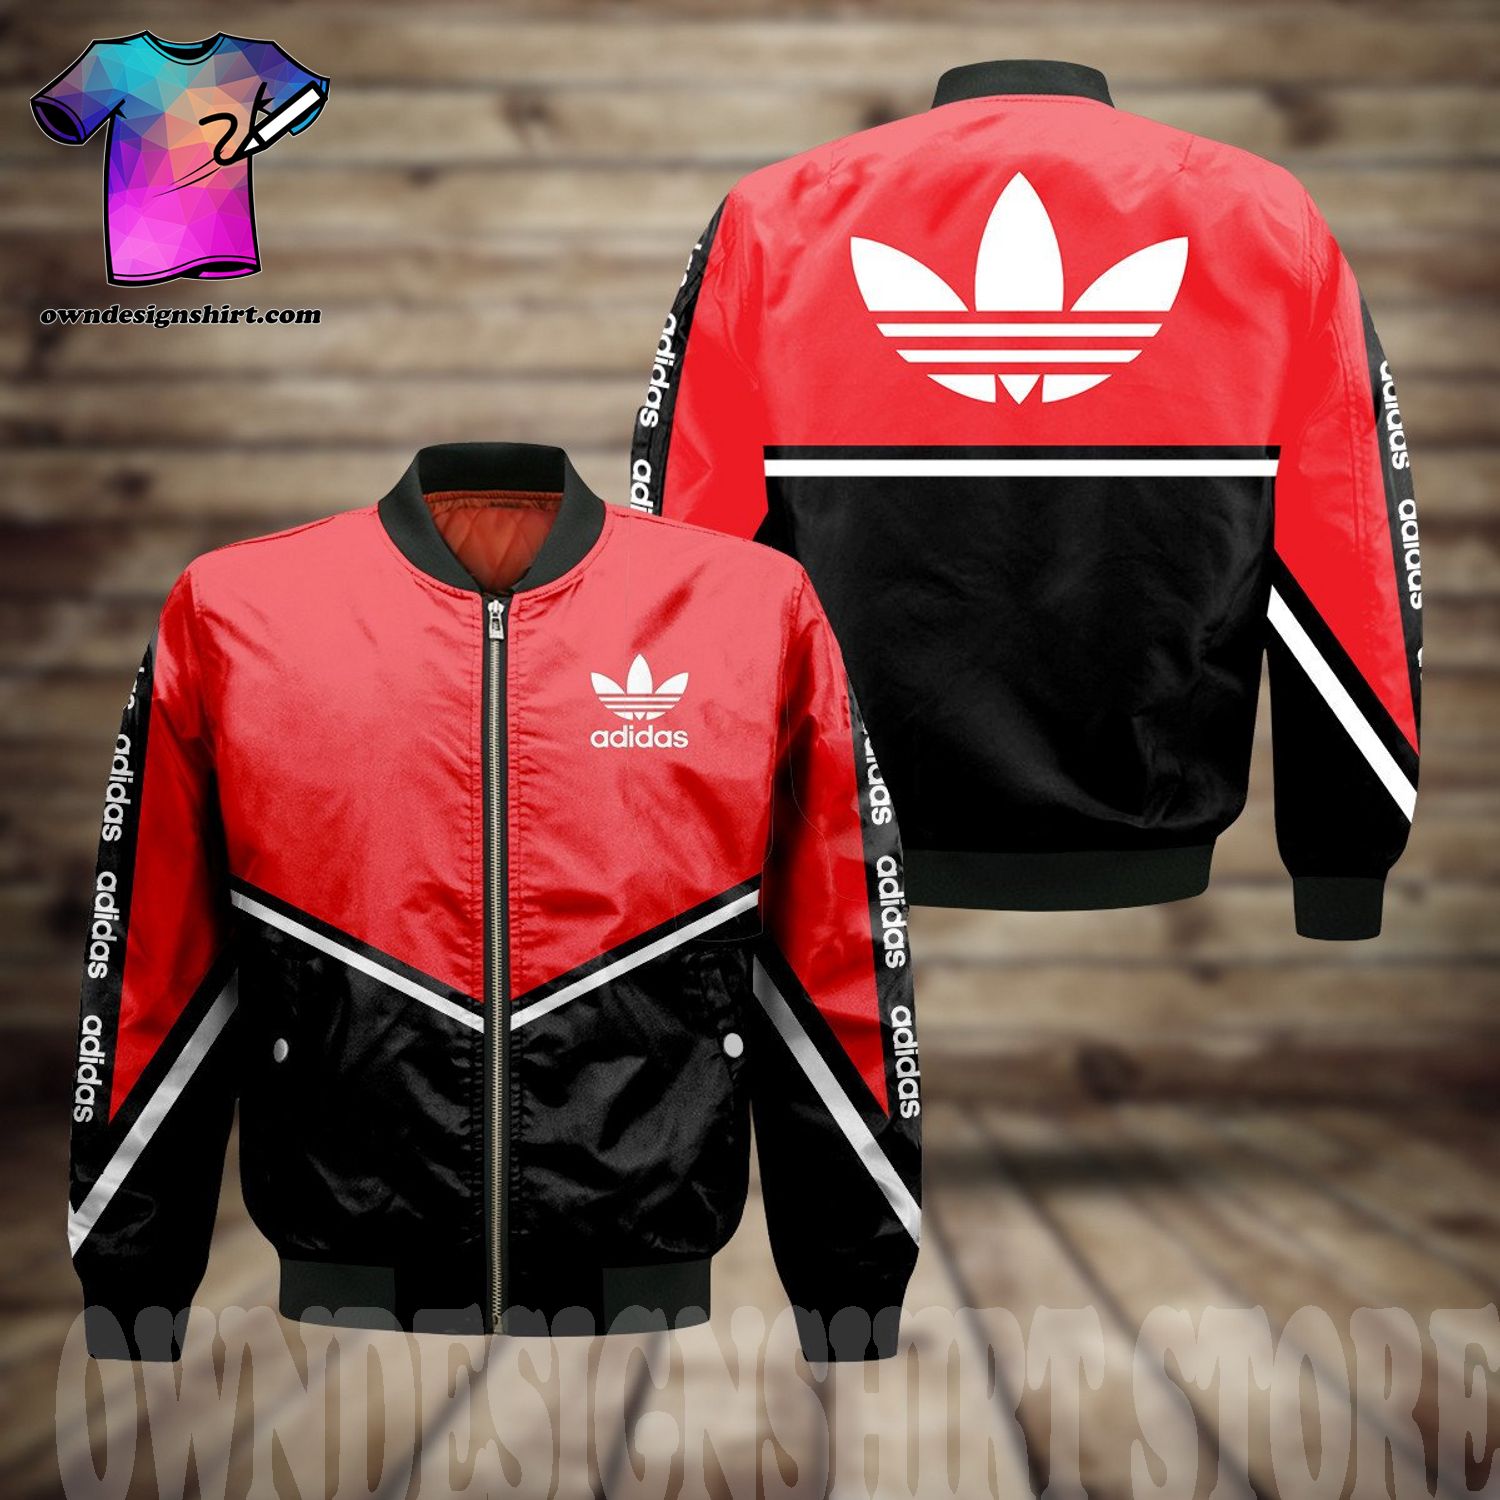 The best selling] Adidas Classic Sport Style Full Bomber Jacket